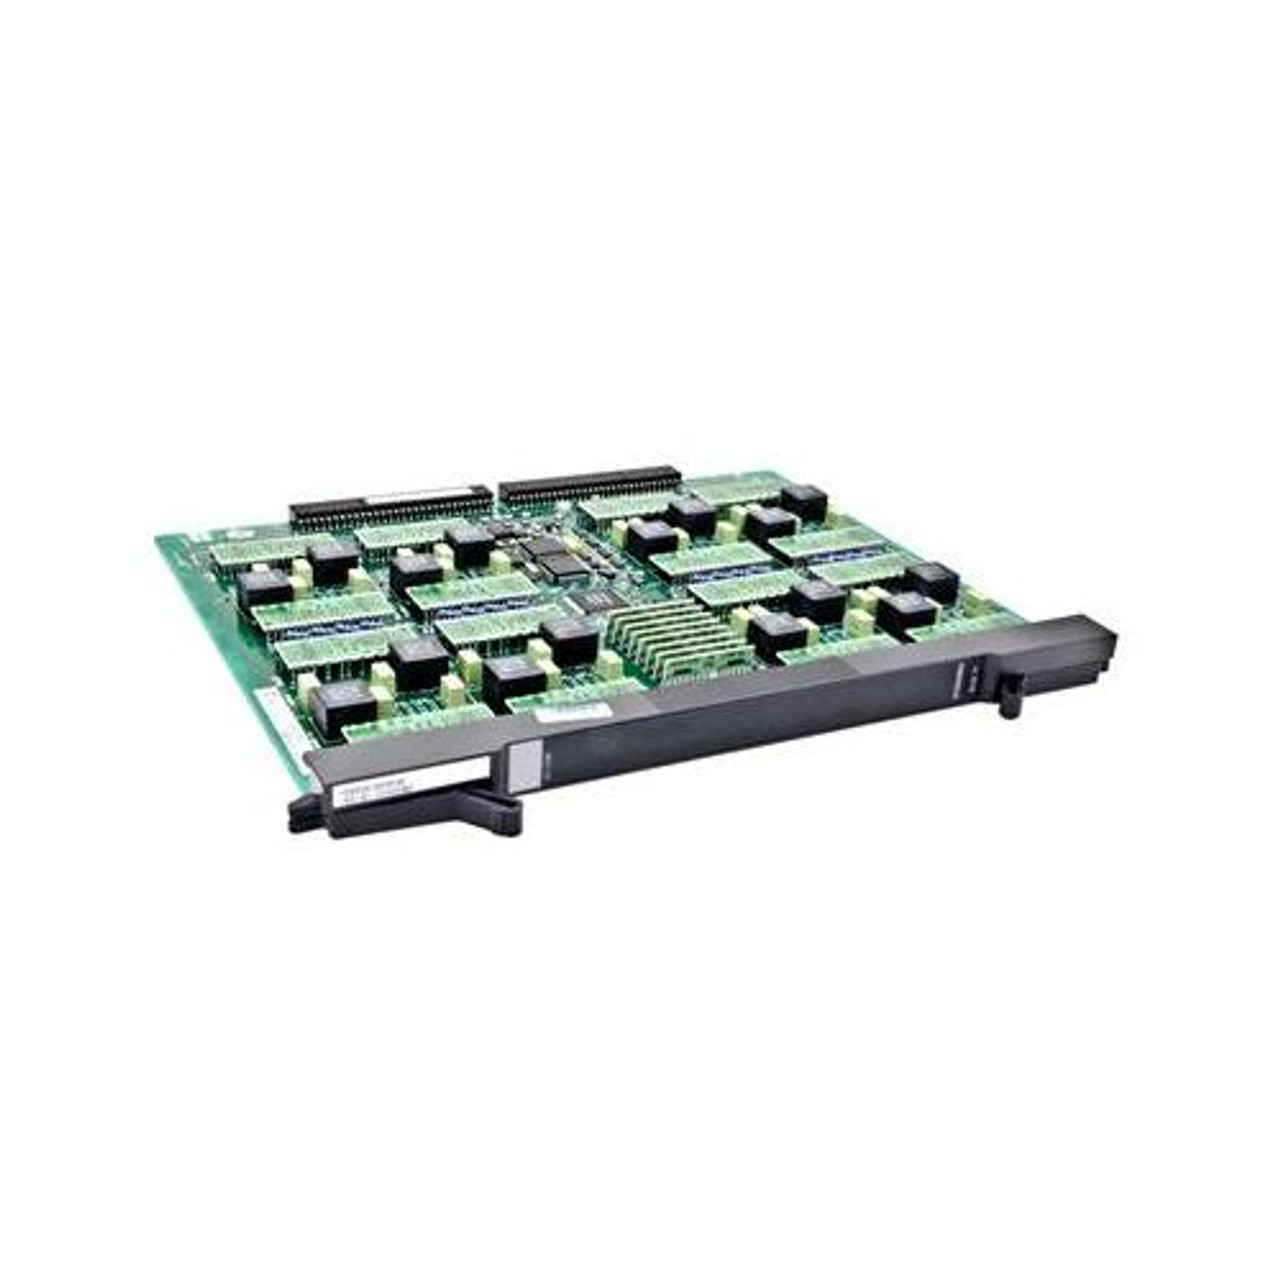 91-004-471001 ZyXEL Communications ALC1248G-51 ADSL2+ 48-Port Line Card for IES-5000M